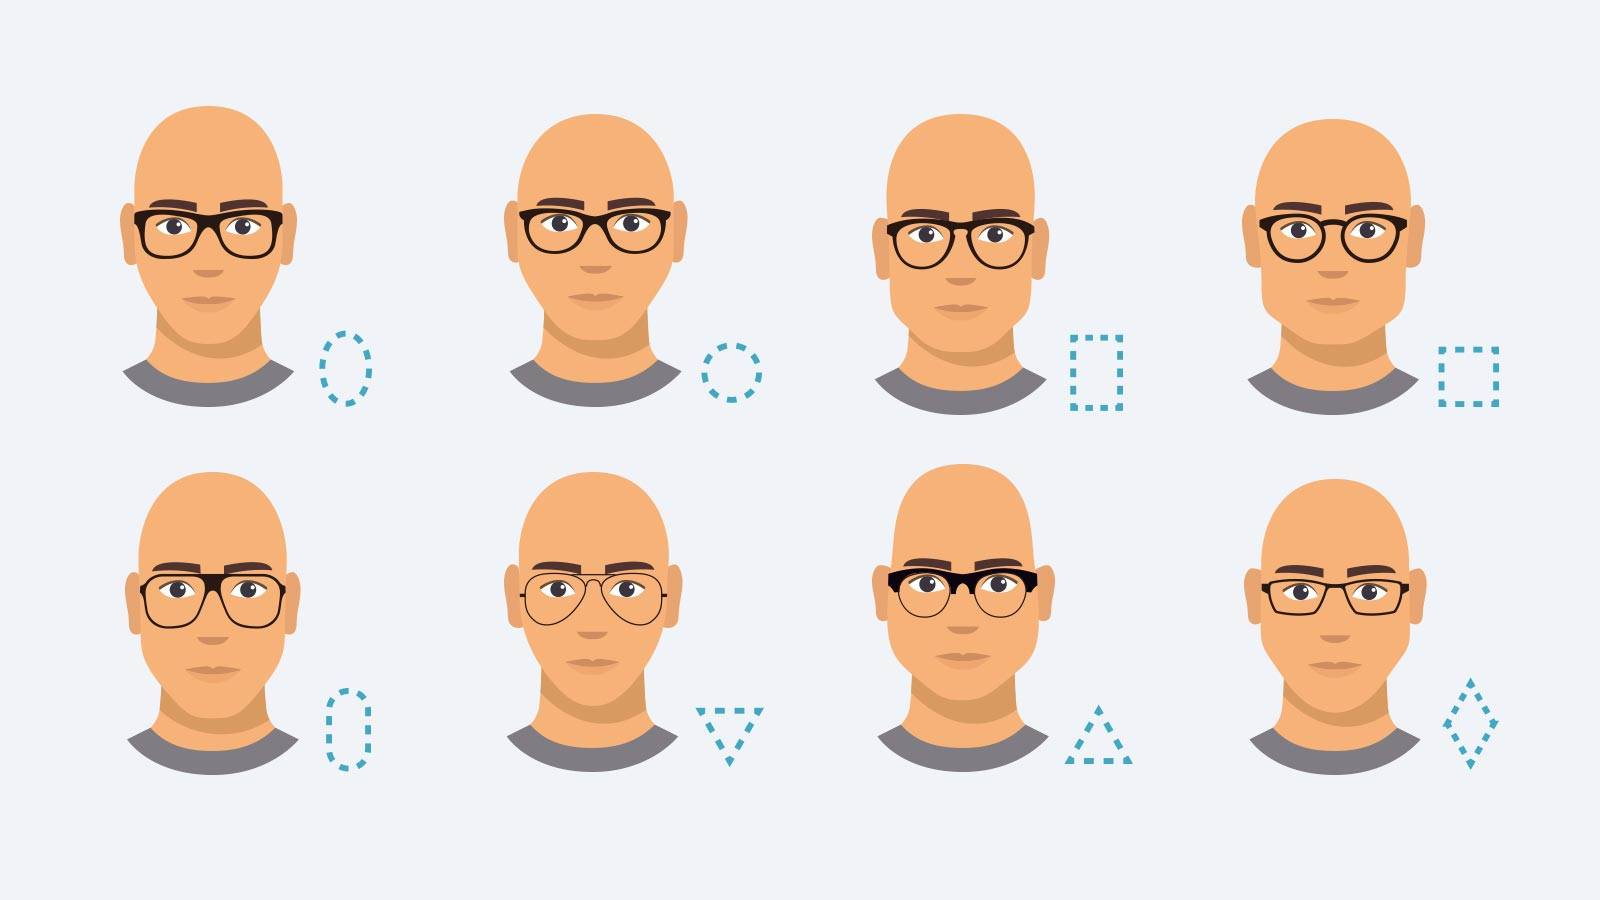 How to choose men's glasses when you have a bald head